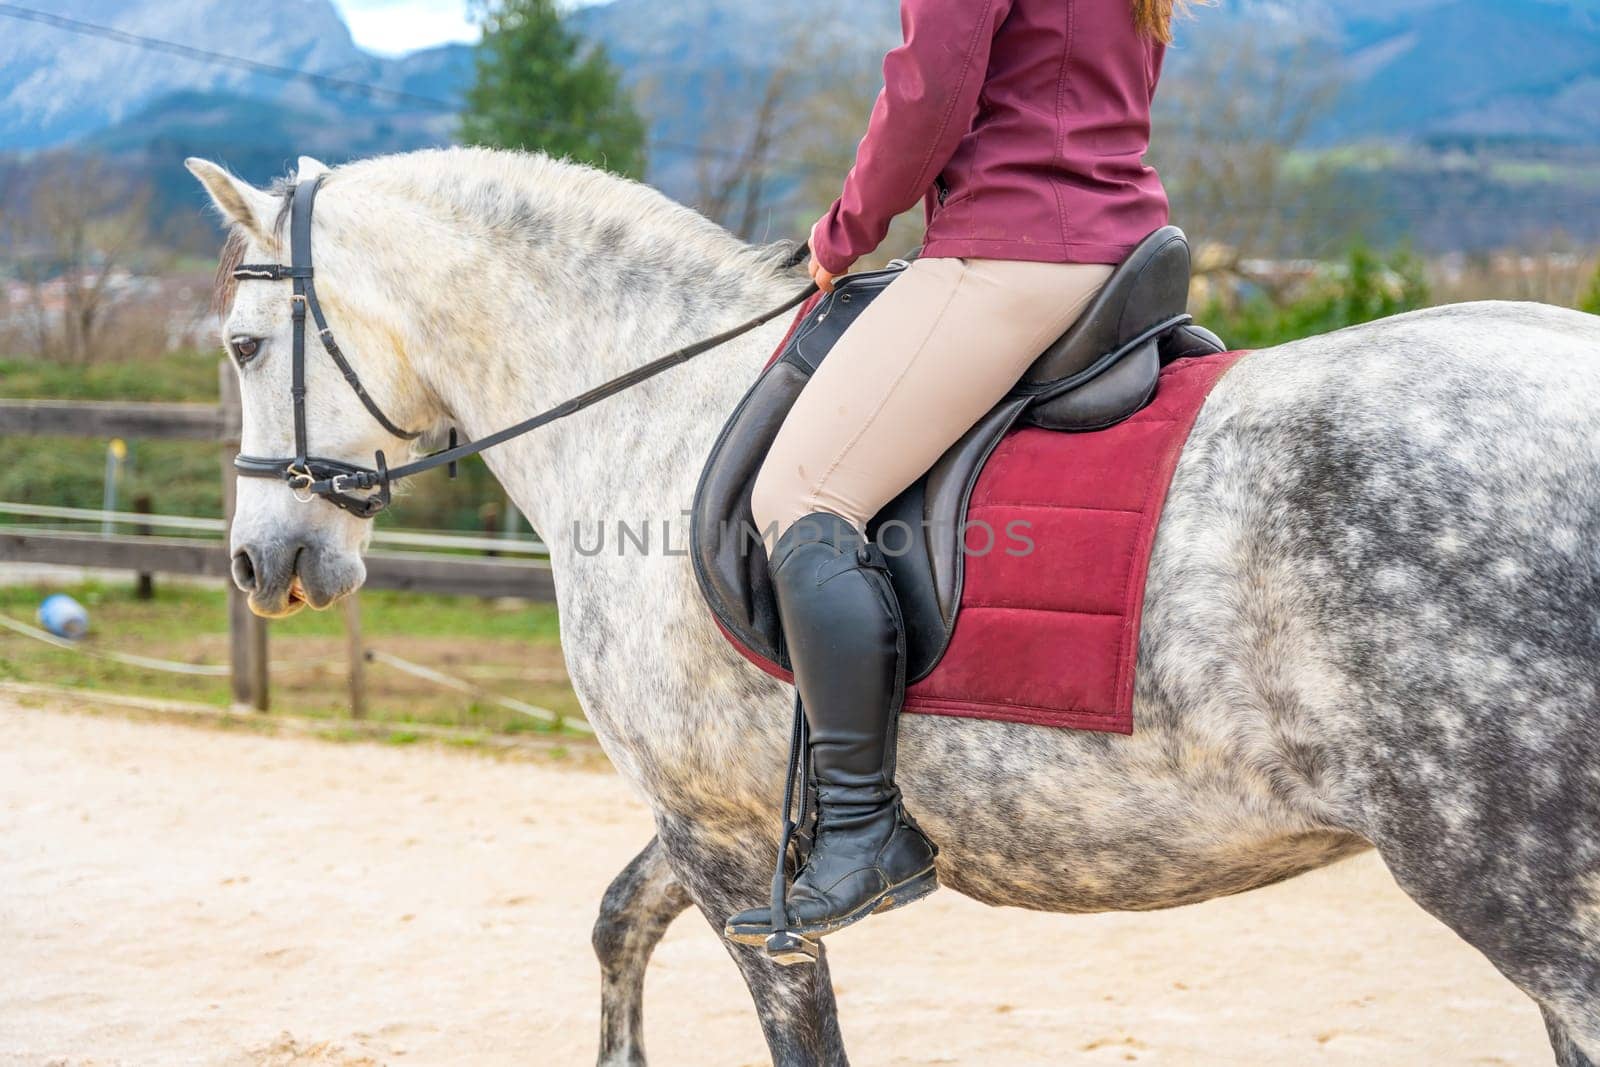 Cropped photo of the lower part of a woman with boots training with a horse